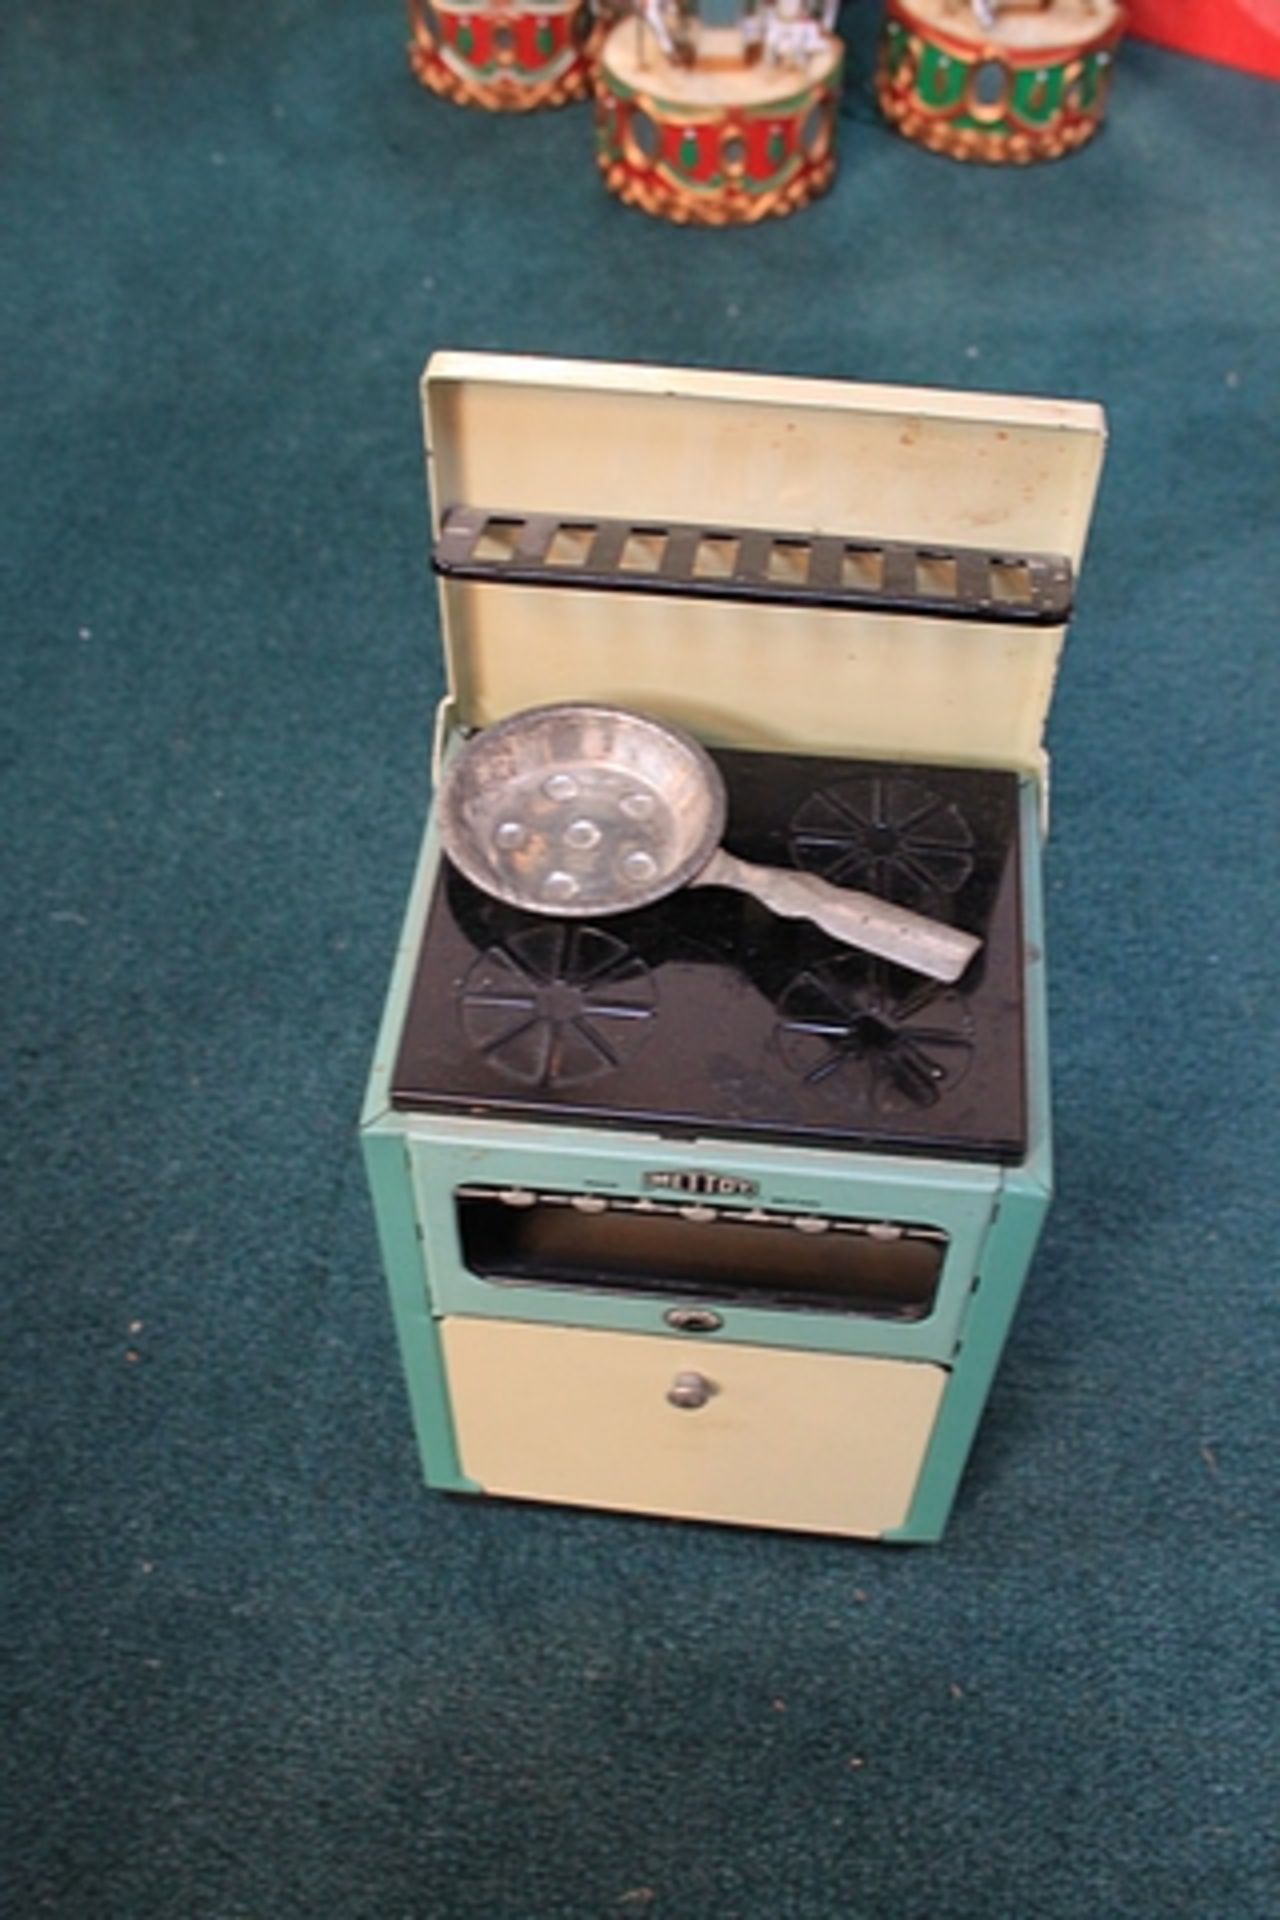 Mettoy By Permission Girl Toy Cooker Complete With Frying Pan. Complete In Box - Image 3 of 3